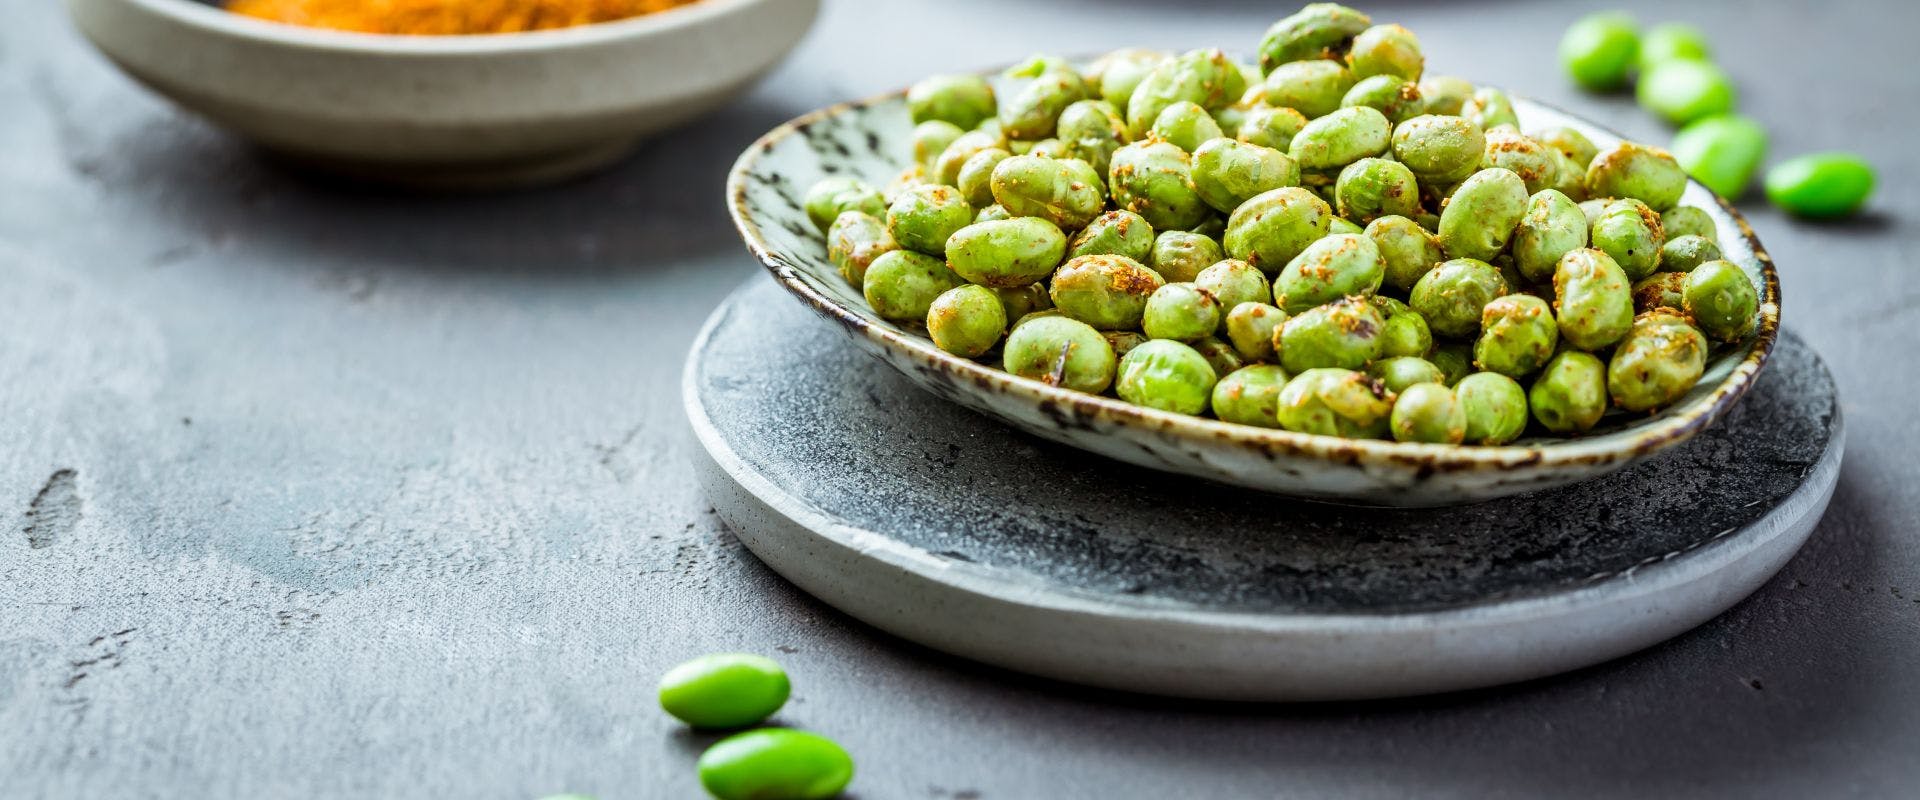 Roasted edamame beans in a bowl